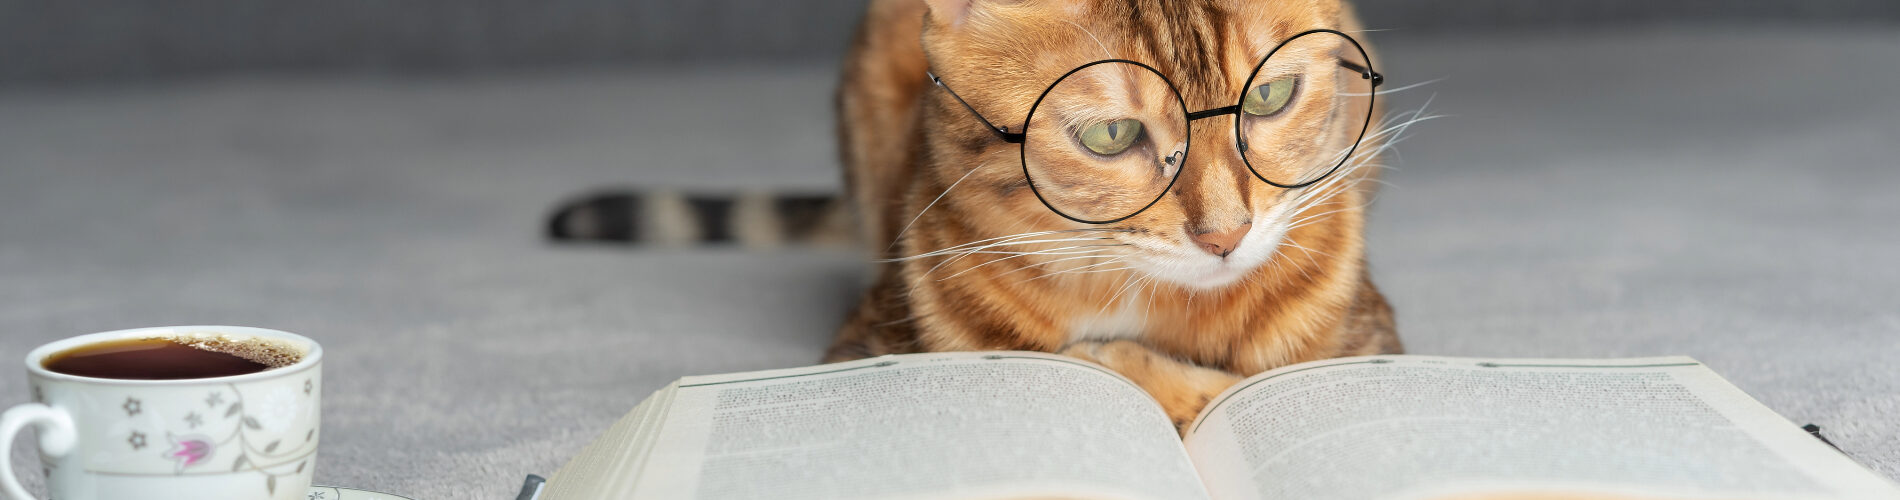 Cat wearing glasses reading a book